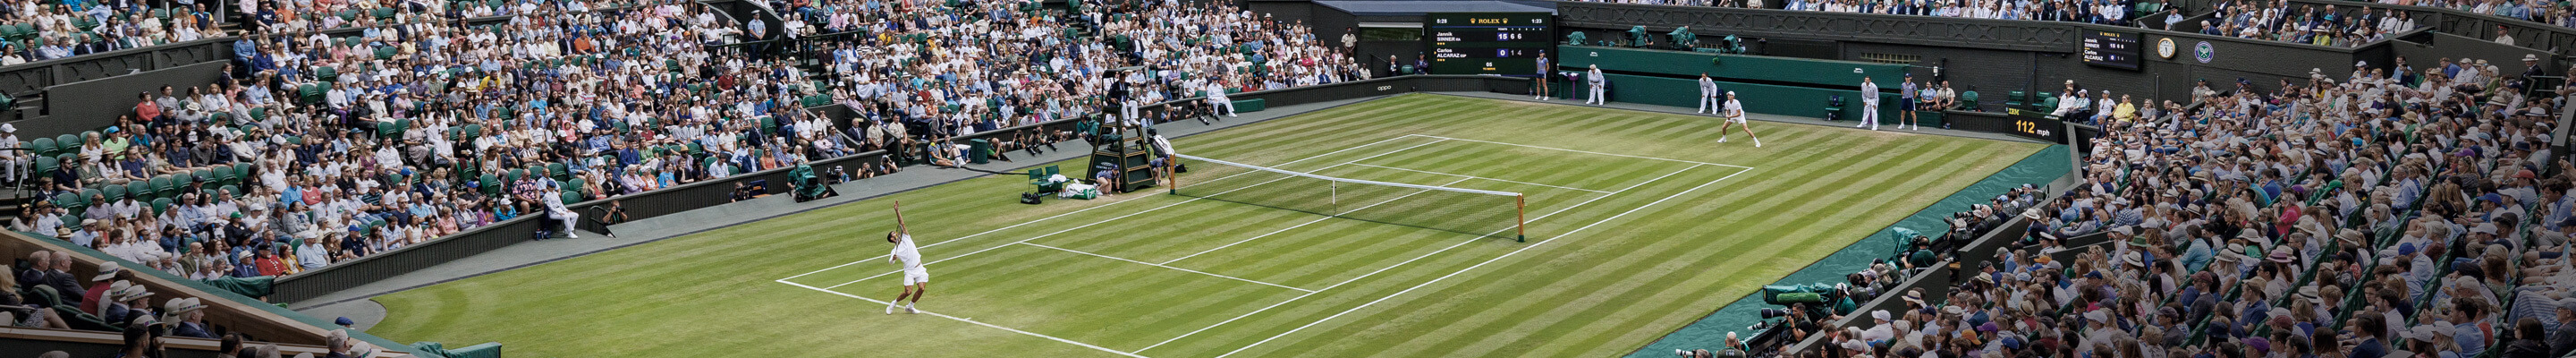 Rolex and Wimbledon: The Choice of Tennis Enthusiasts for 40 Years